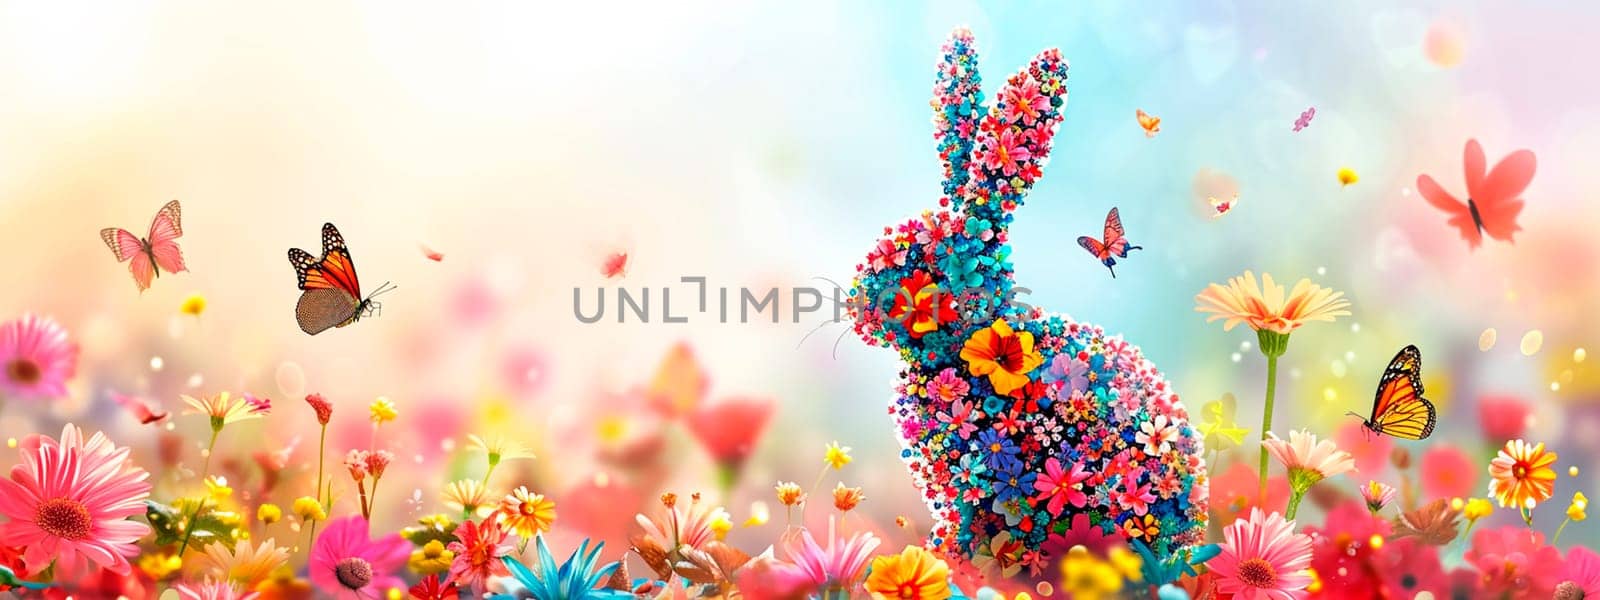 bunny with flowers postcard for Easter. Selective focus. by yanadjana